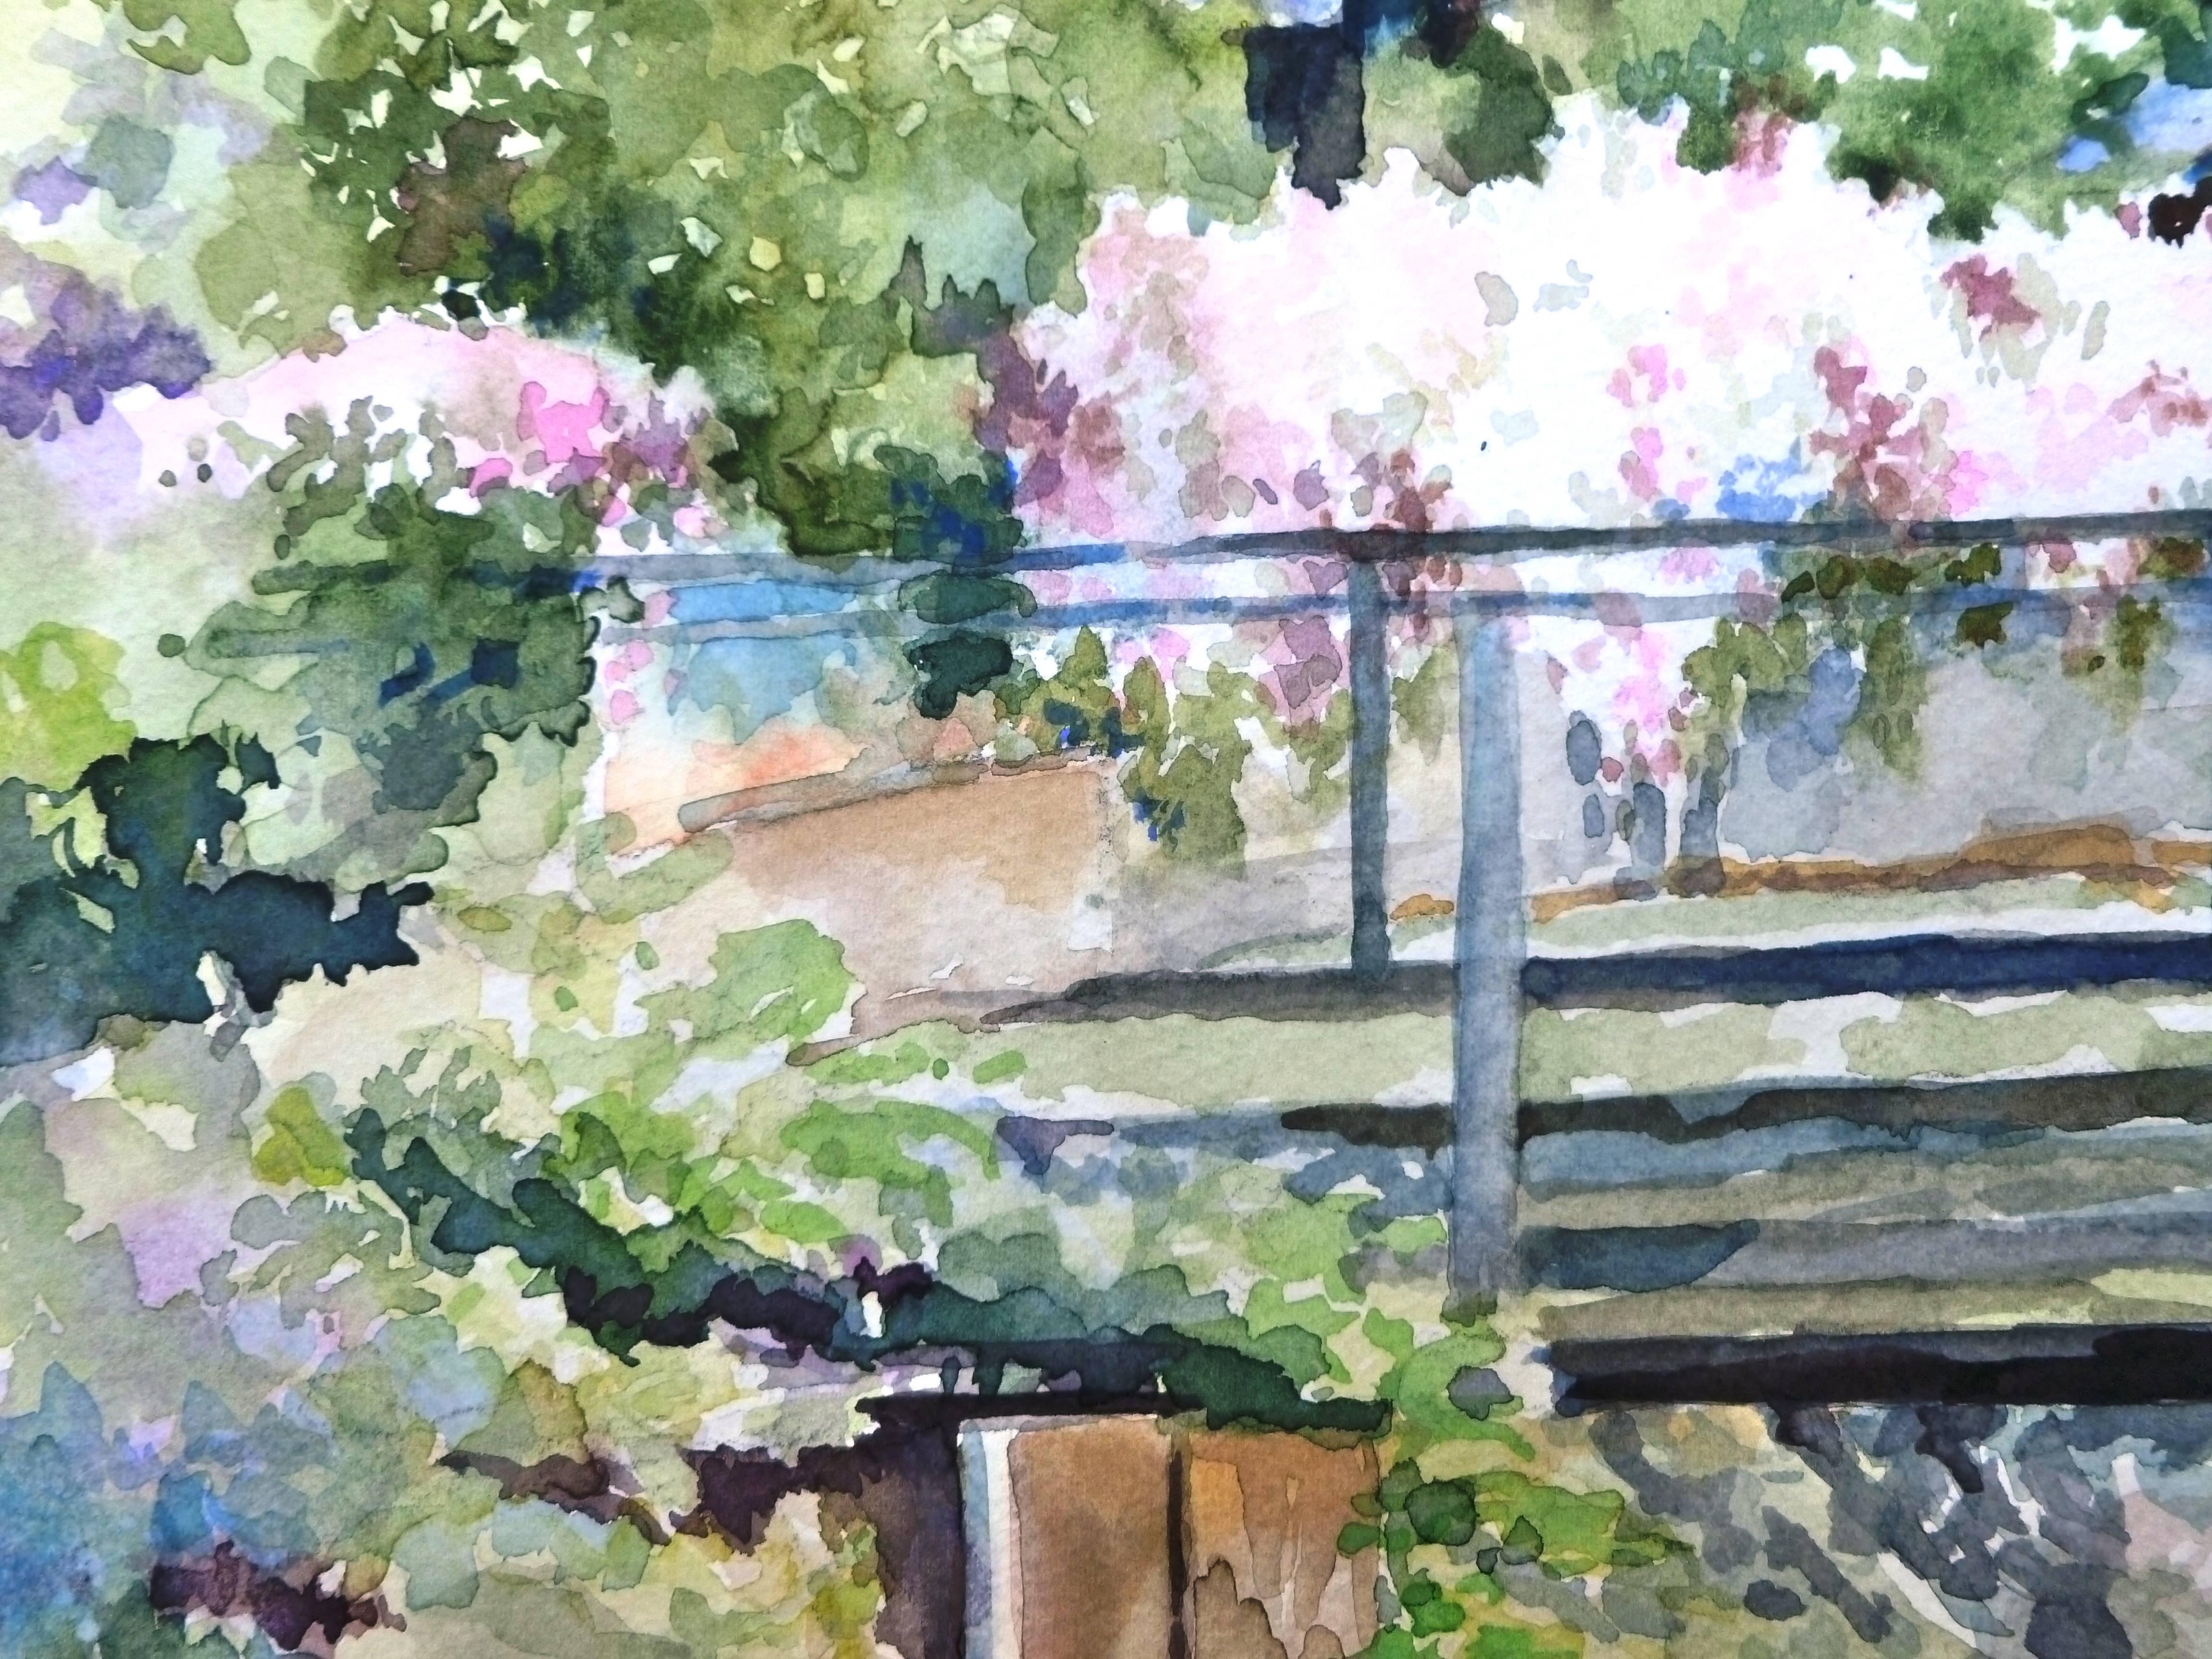 Jasmine Reflections Catherine McCargar Watercolor painting on paper
One-of-a-kind
Signed on front
2017
20 in. h x 14 in. w 
0 lbs. 2 oz. Artist Comments 
This is an impressionistic piece of a somewhat hidden location on the property of the historic